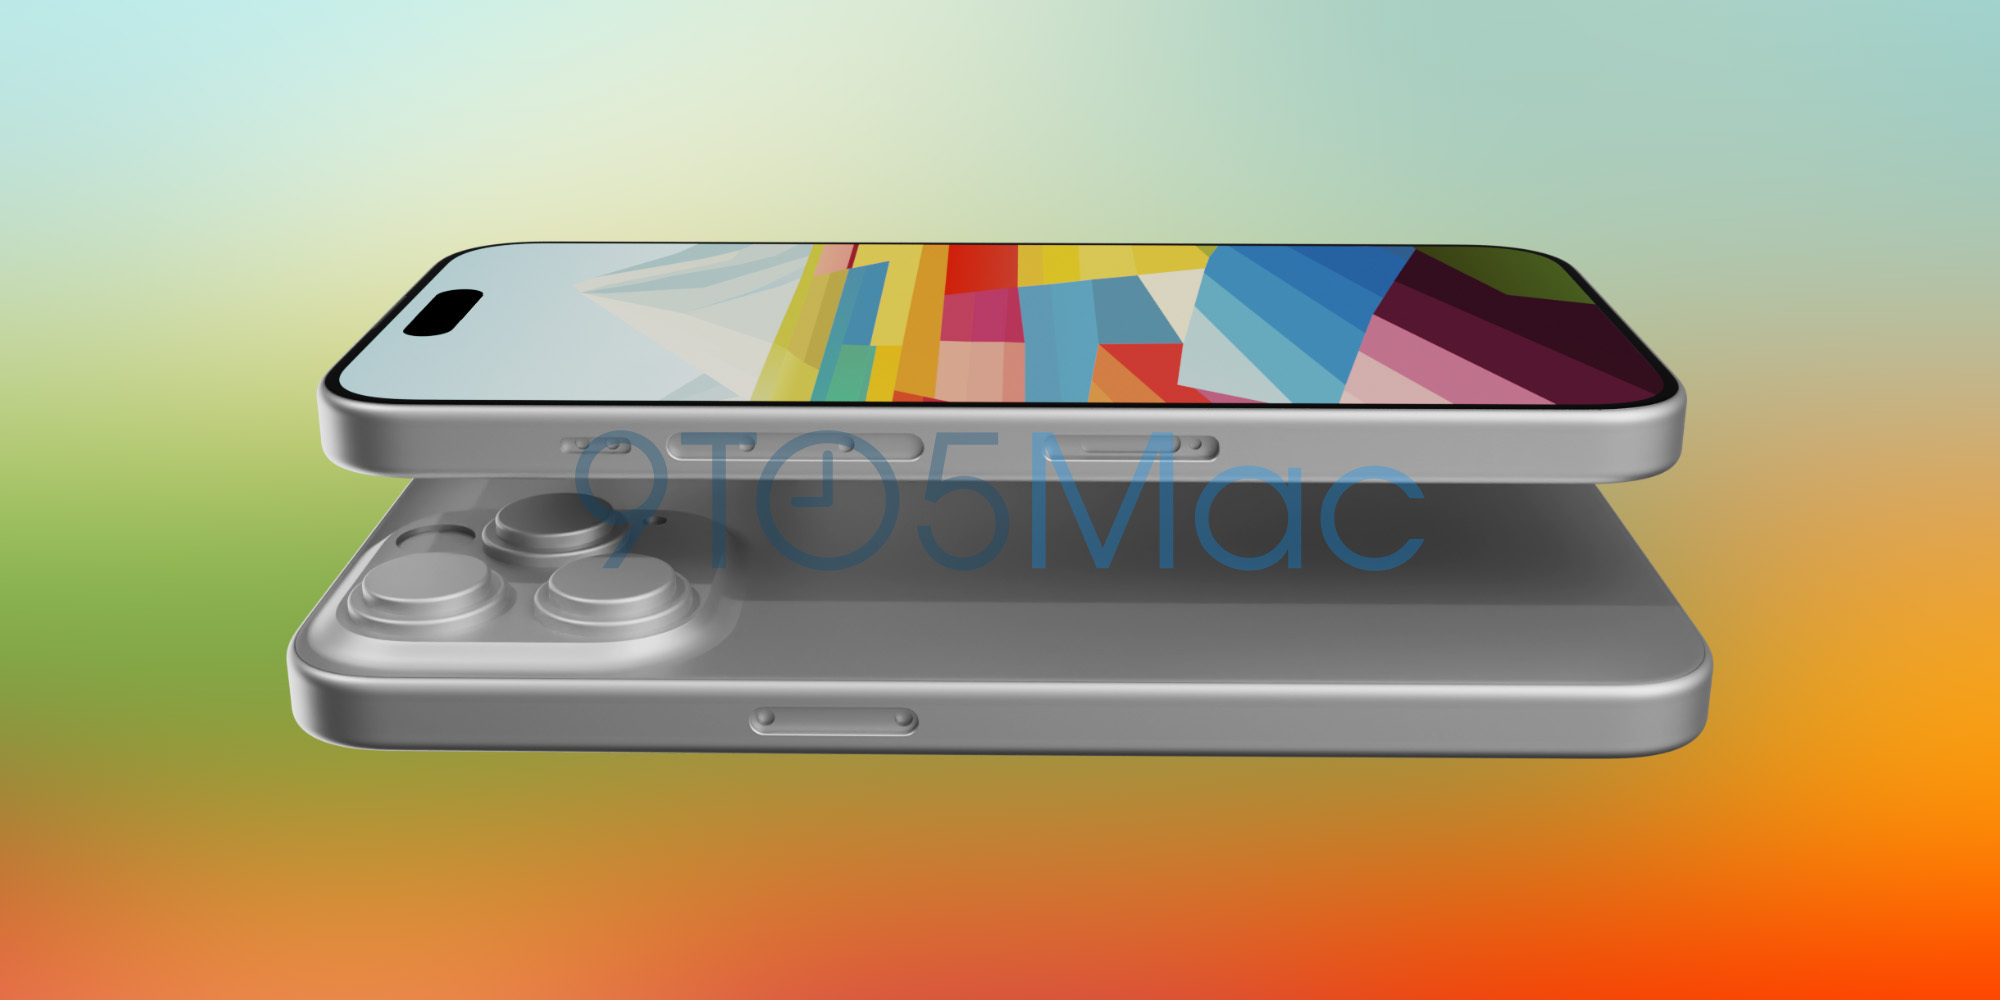 Larger camera unit, slim bezel display and USB-C: CAD renders of iPhone 15 Pro have surfaced online